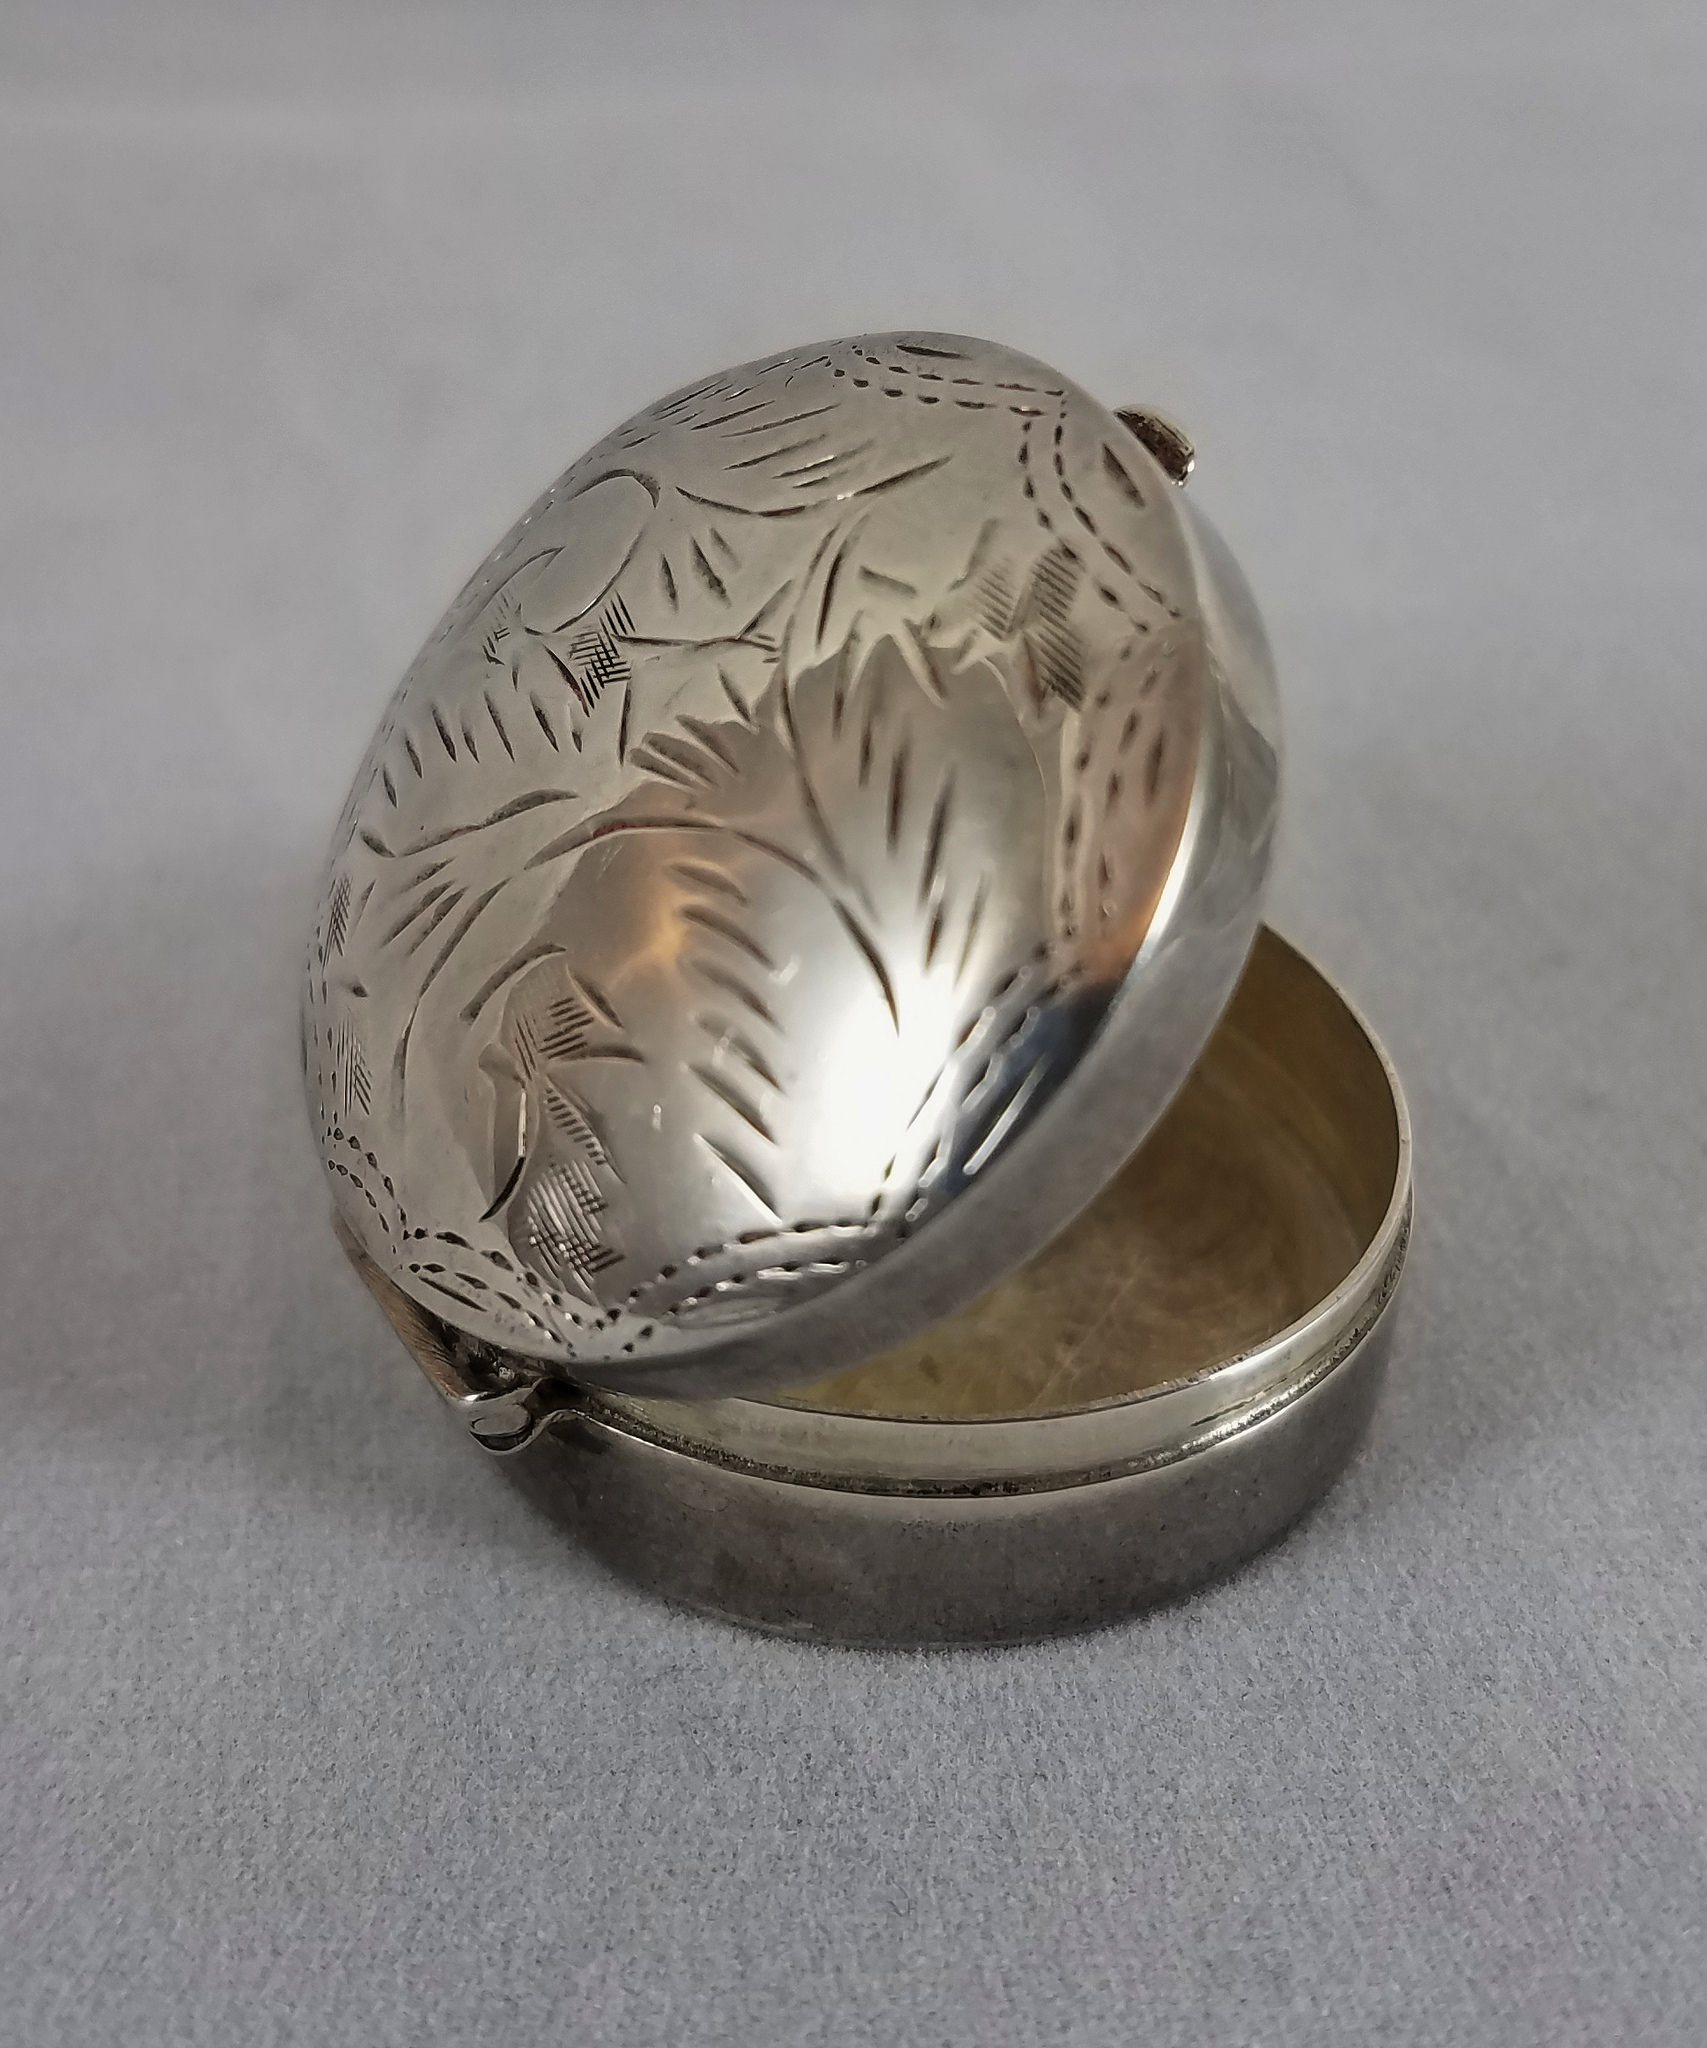 Little sterling pill box - help with maker / date | Antiques Board